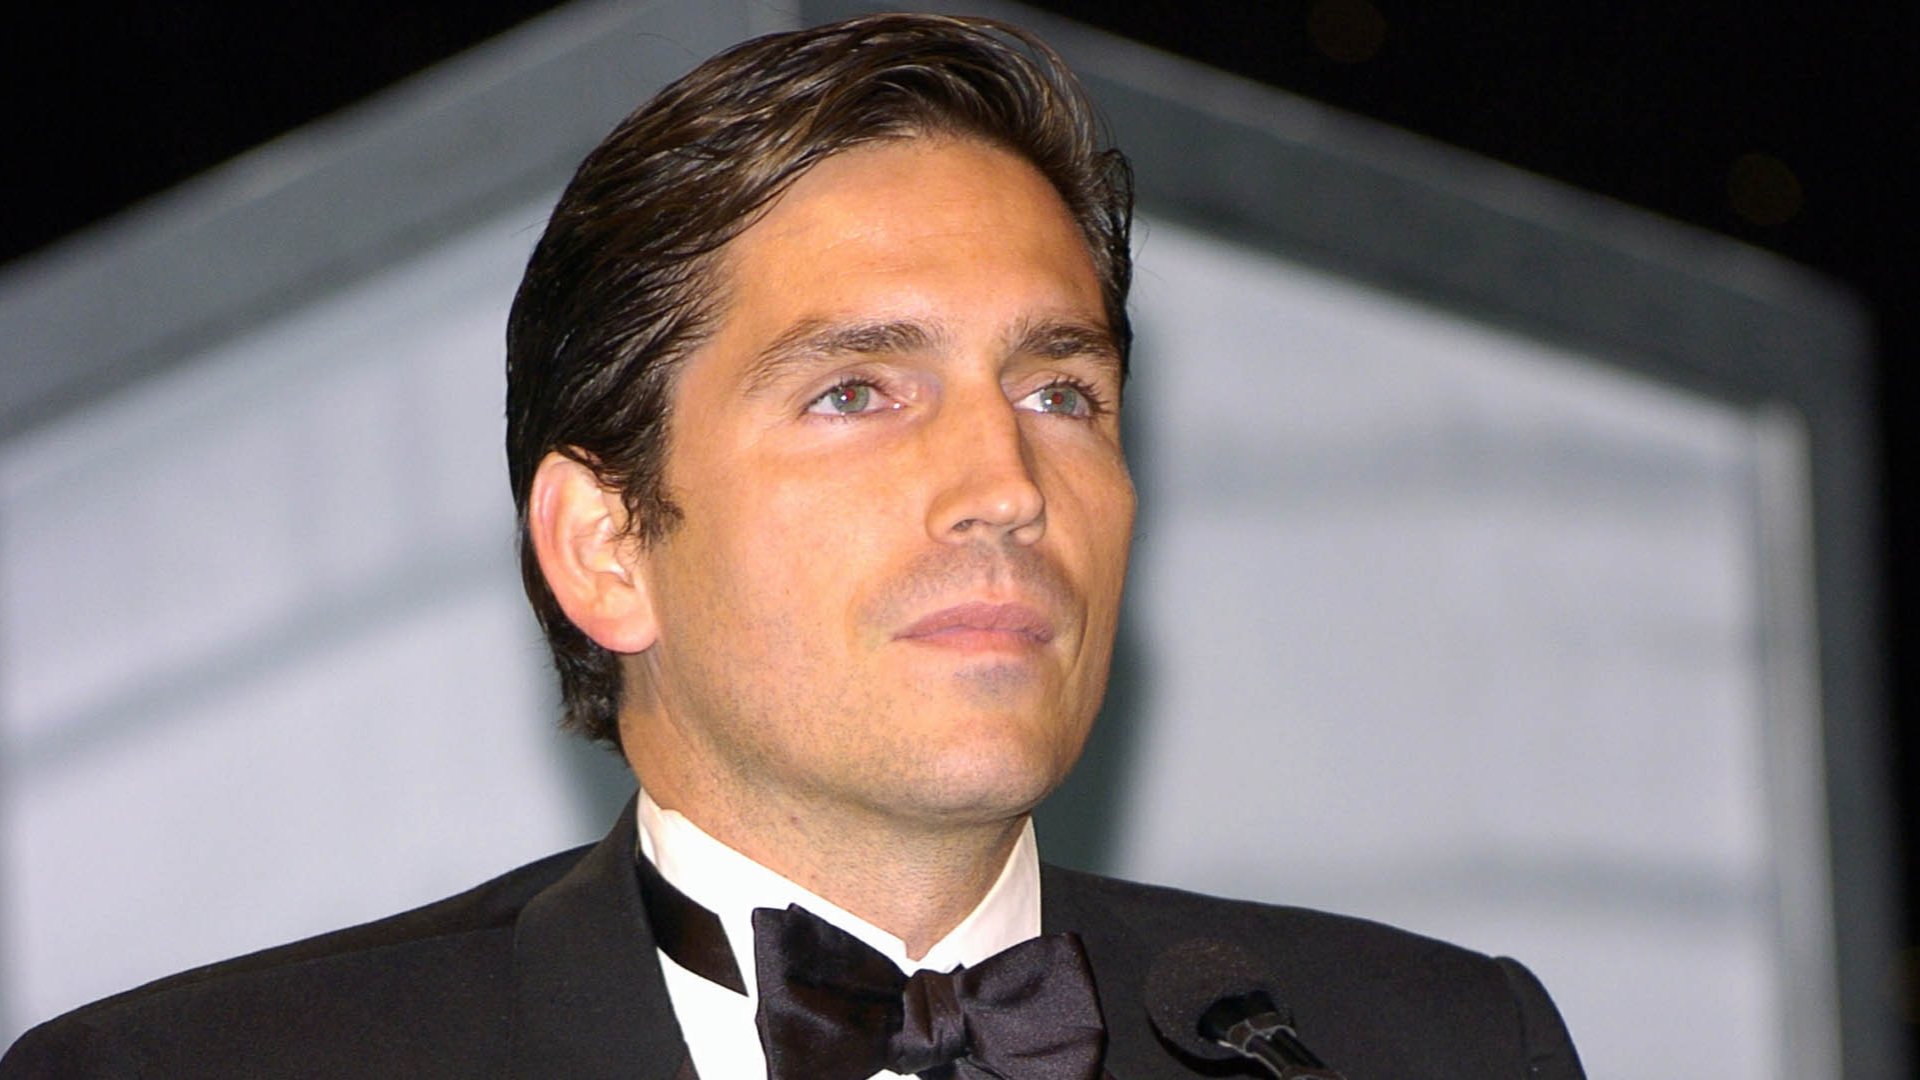 What Happened To Jim Caviezel In 2009?